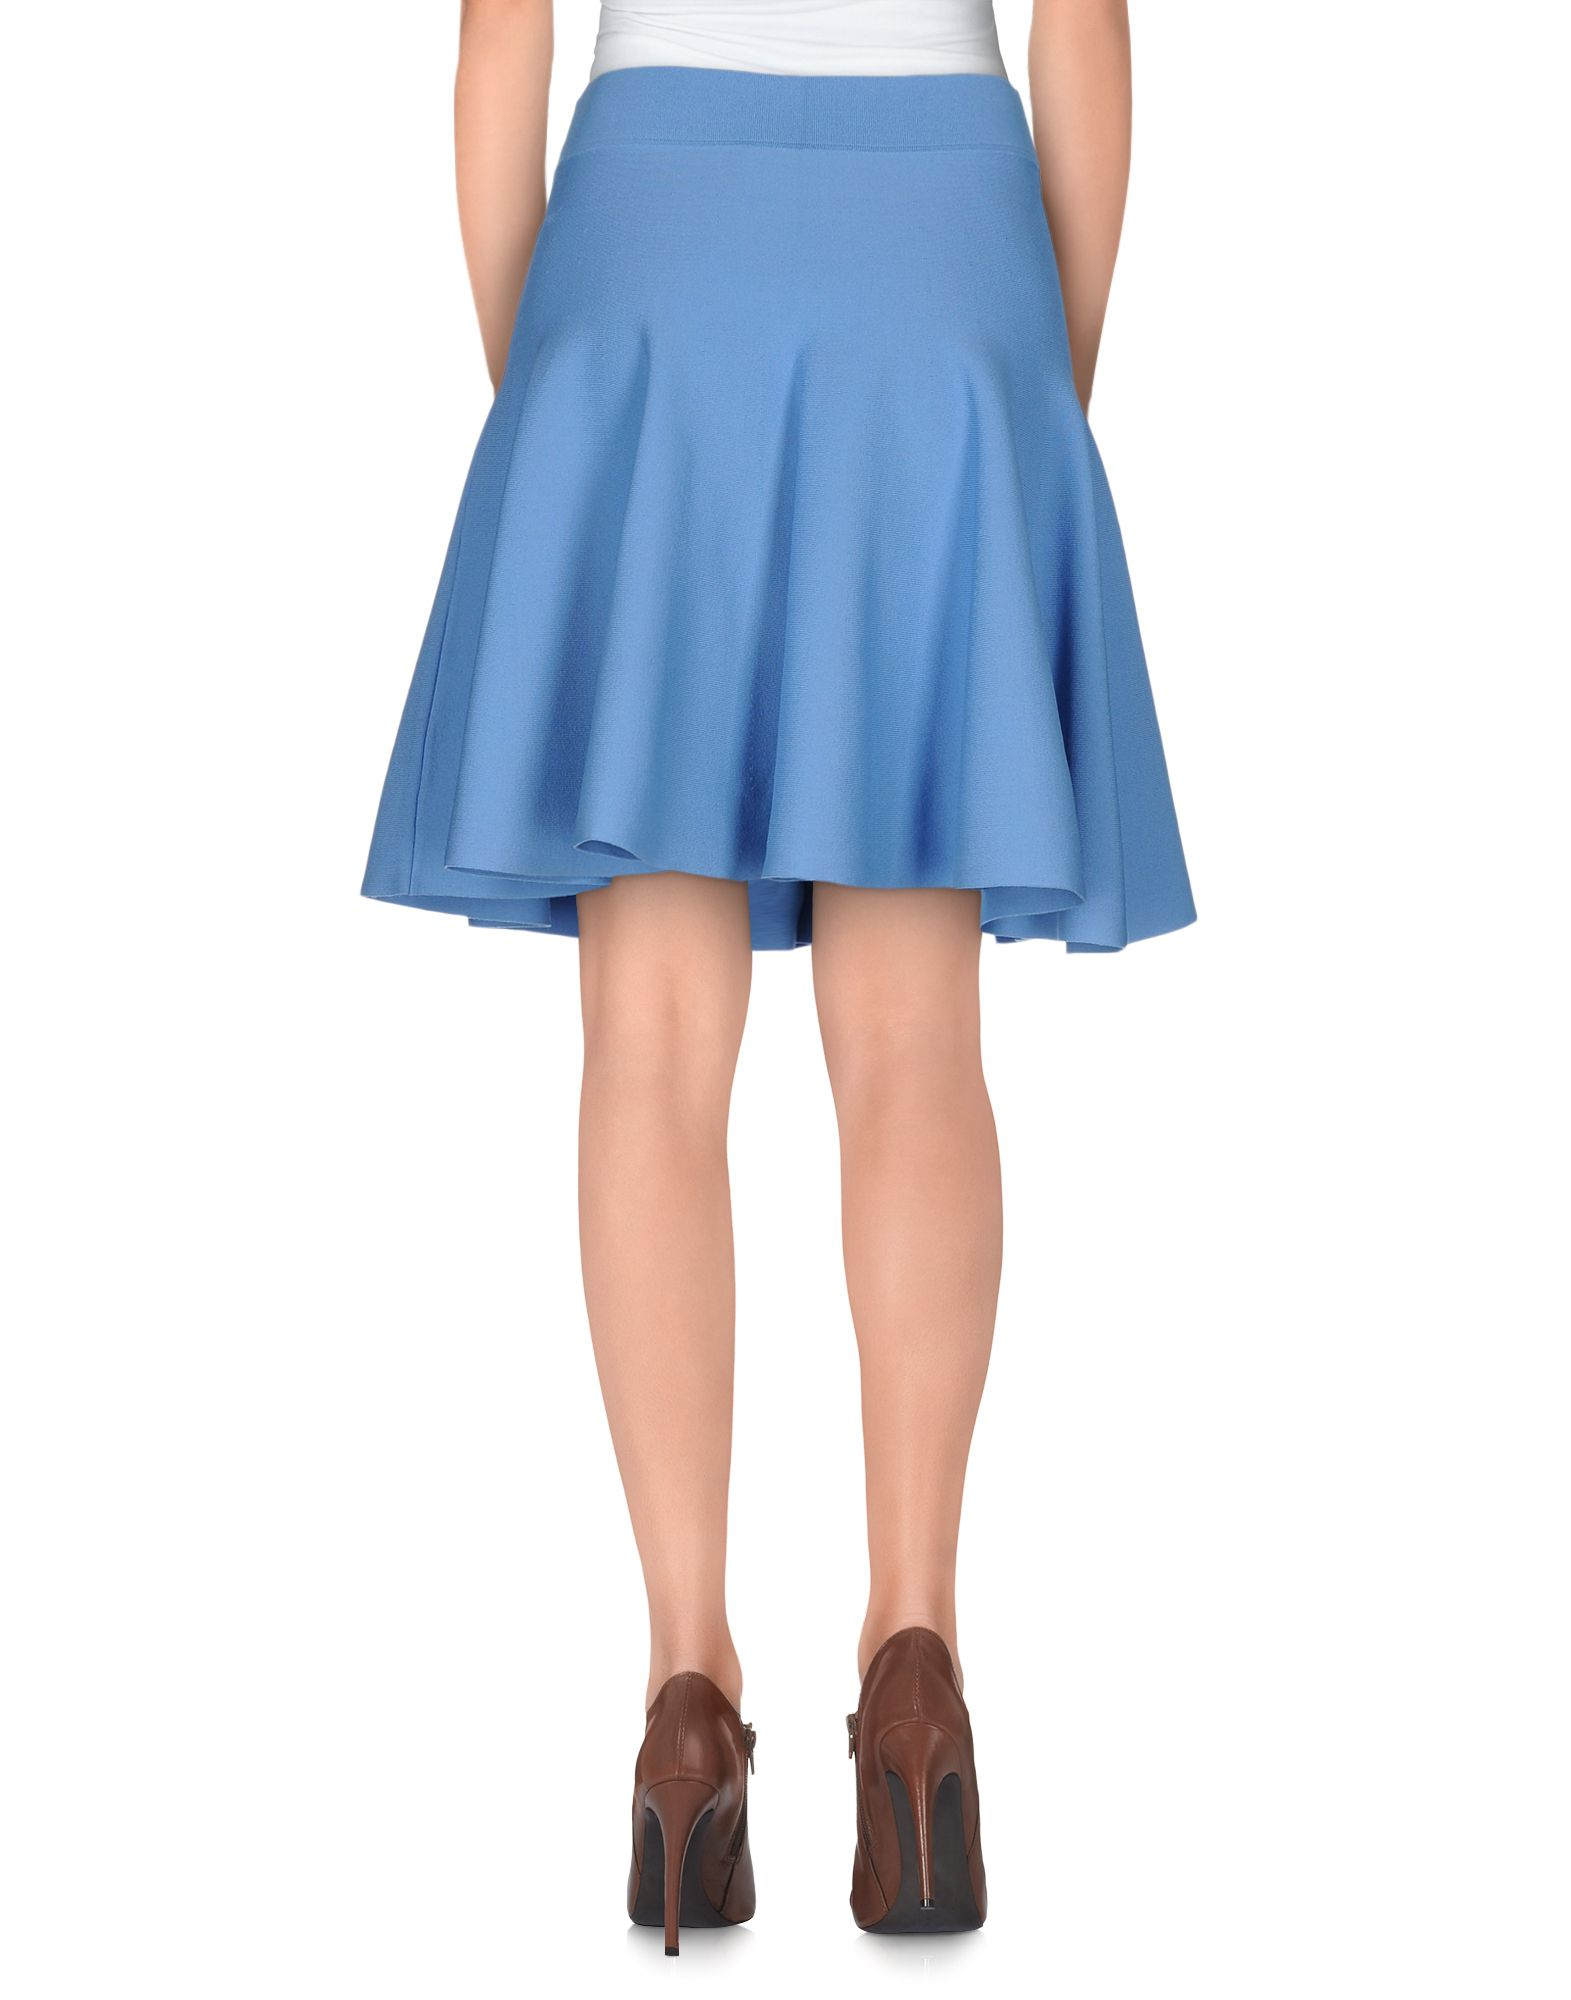 P.A.R.O.S.H. Synthetic Knee Length Skirt in Blue - Lyst